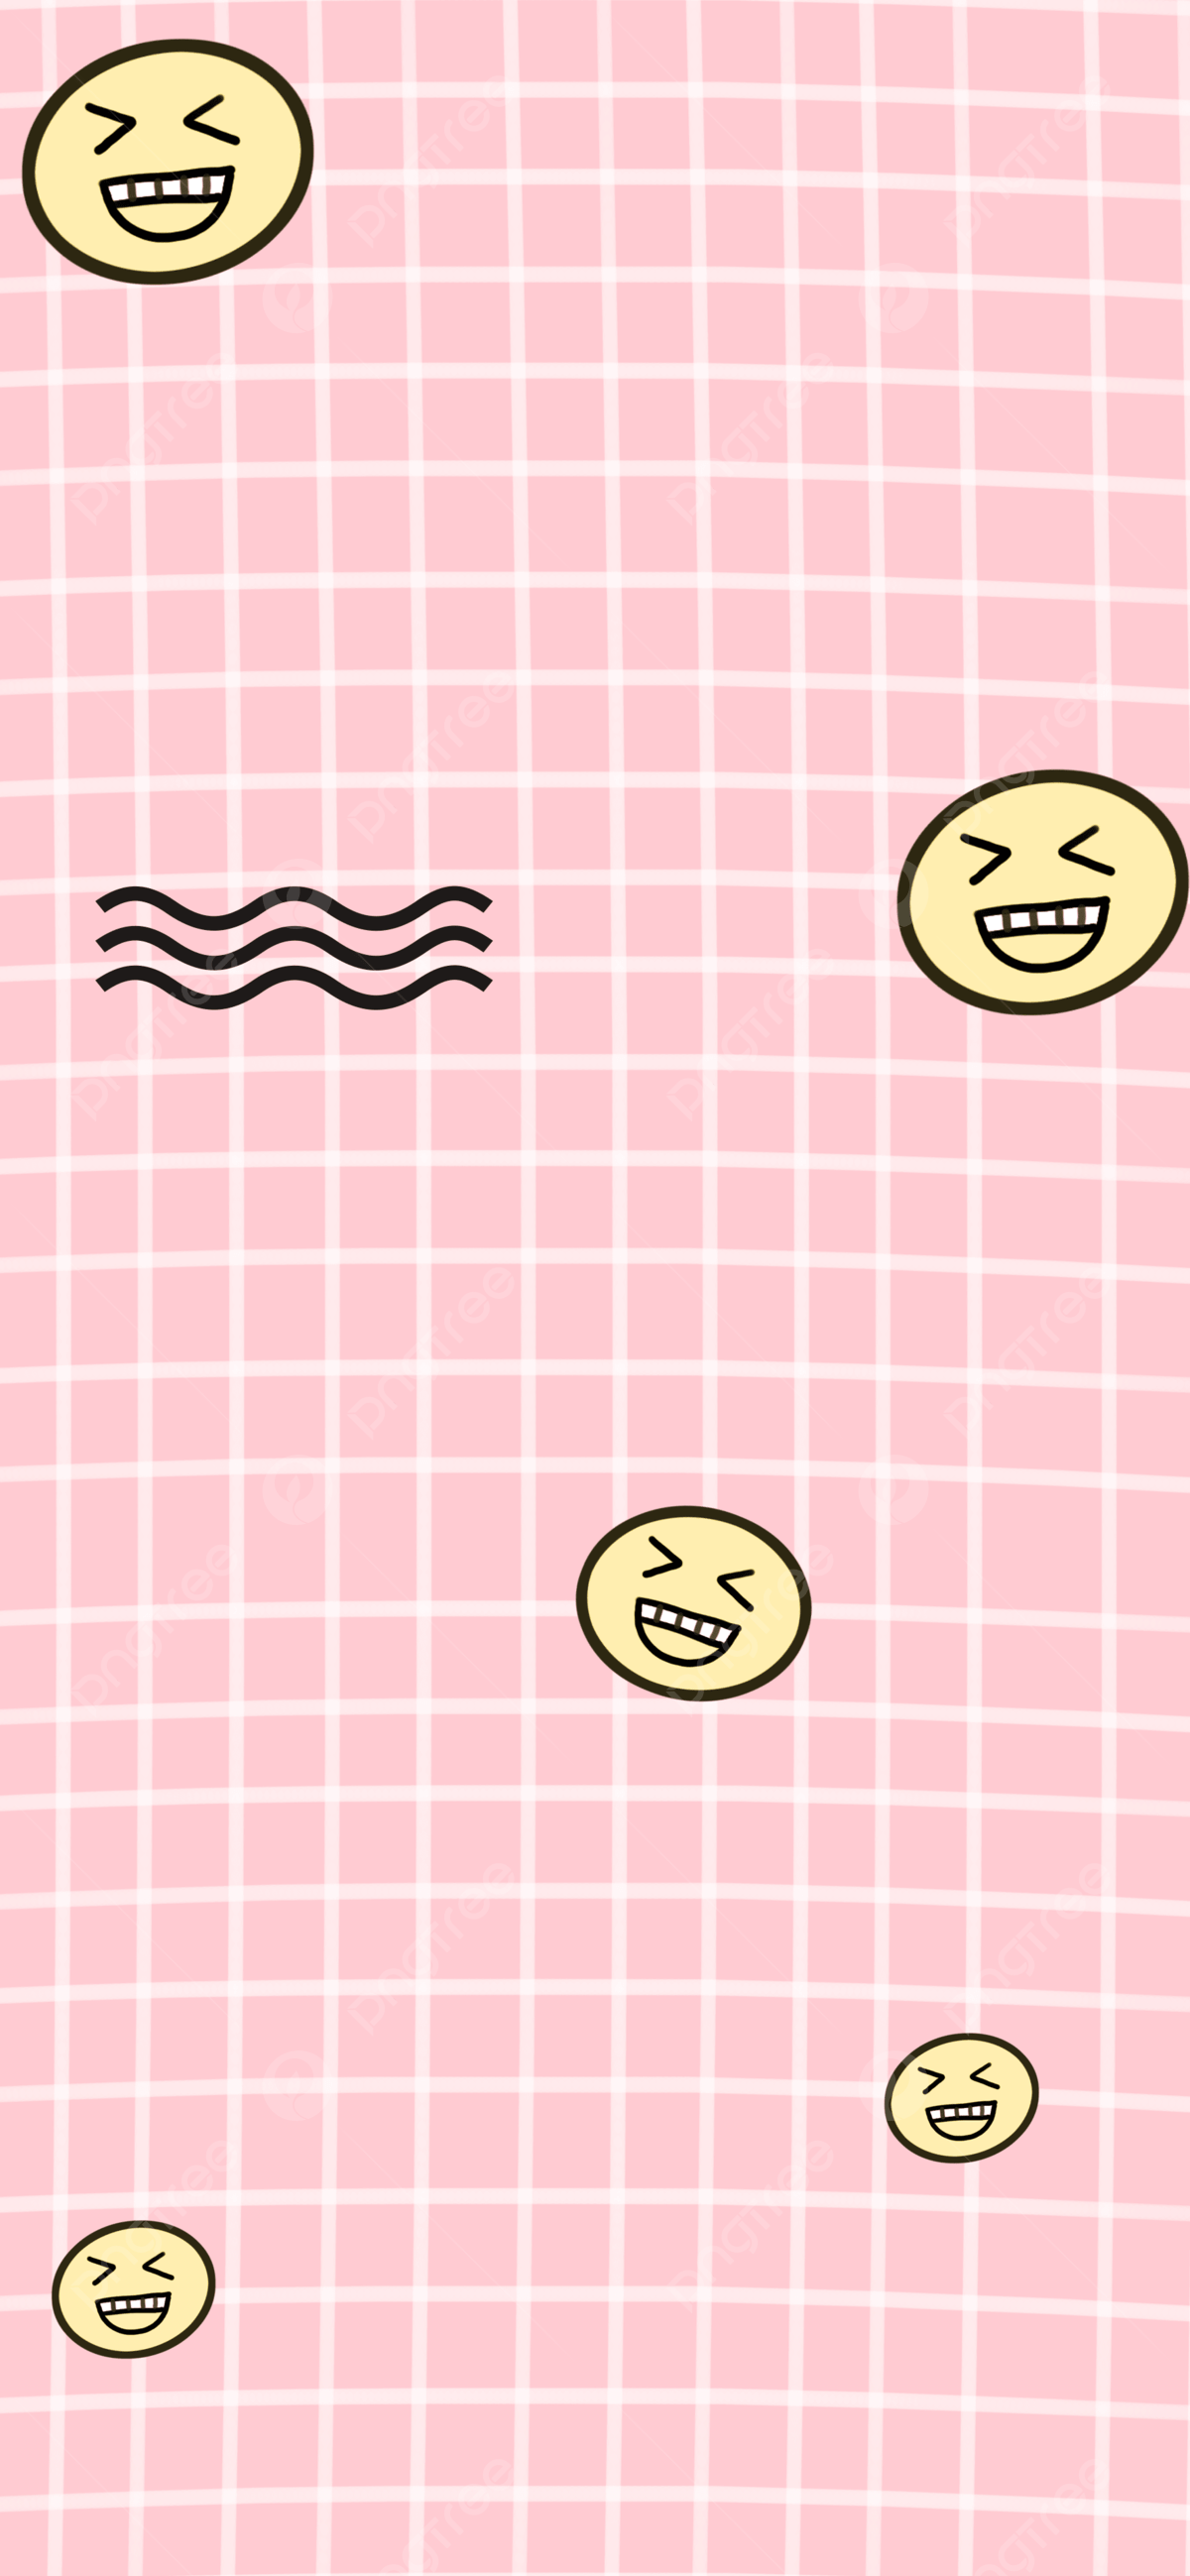 A pink background with various faces and waves - Design, smile